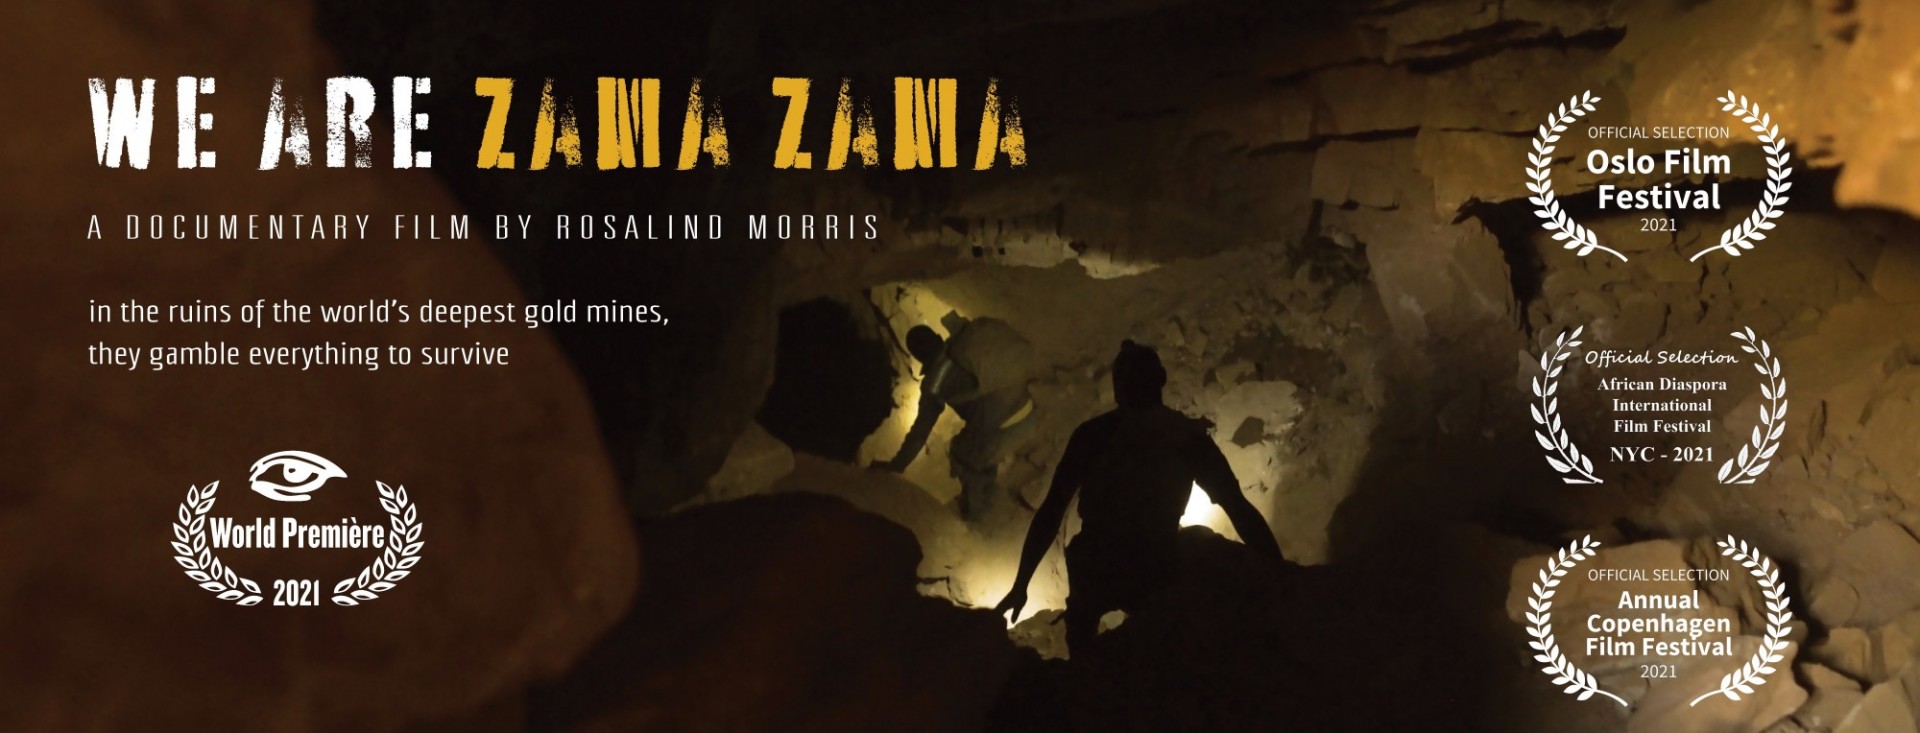 Poster of We are Zama Zama, with miners in pit and laurels